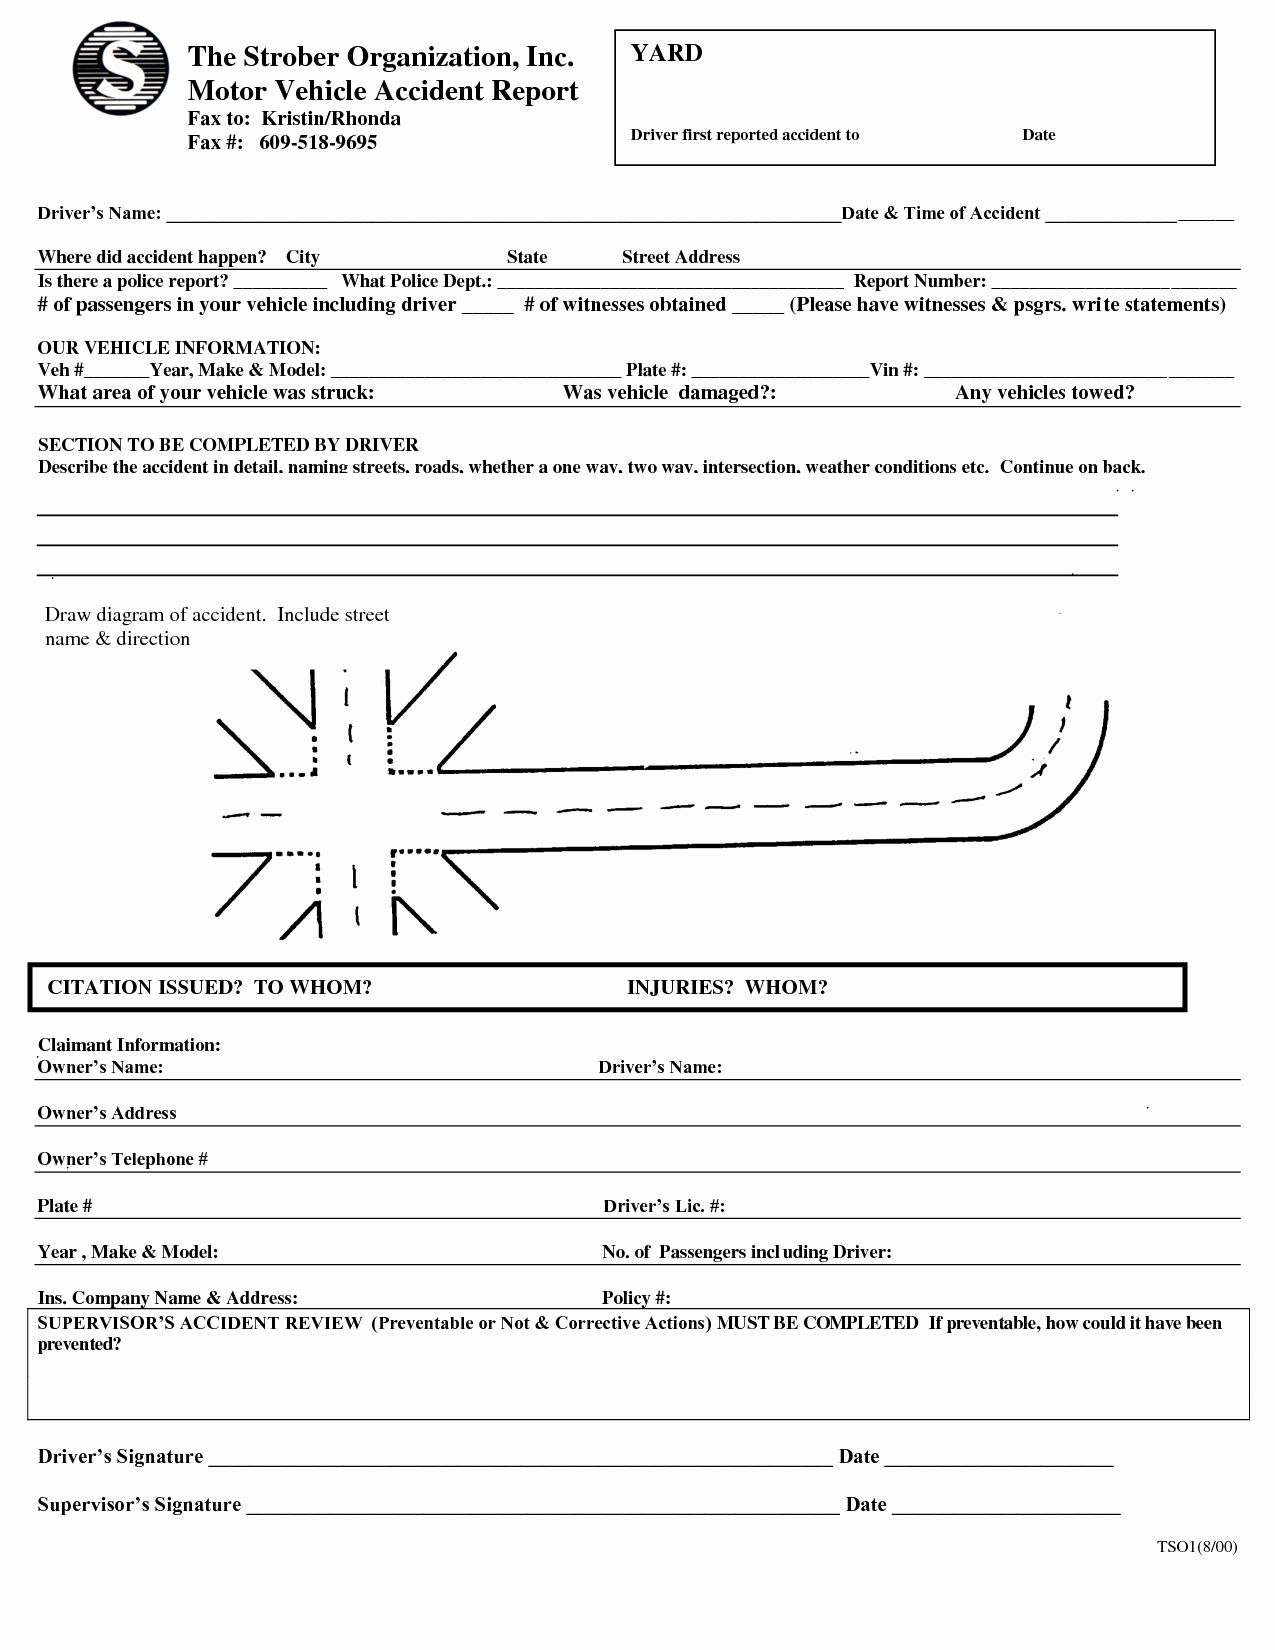 Police Report Format  Glendale Community with regard to Vehicle Accident Report Form Template